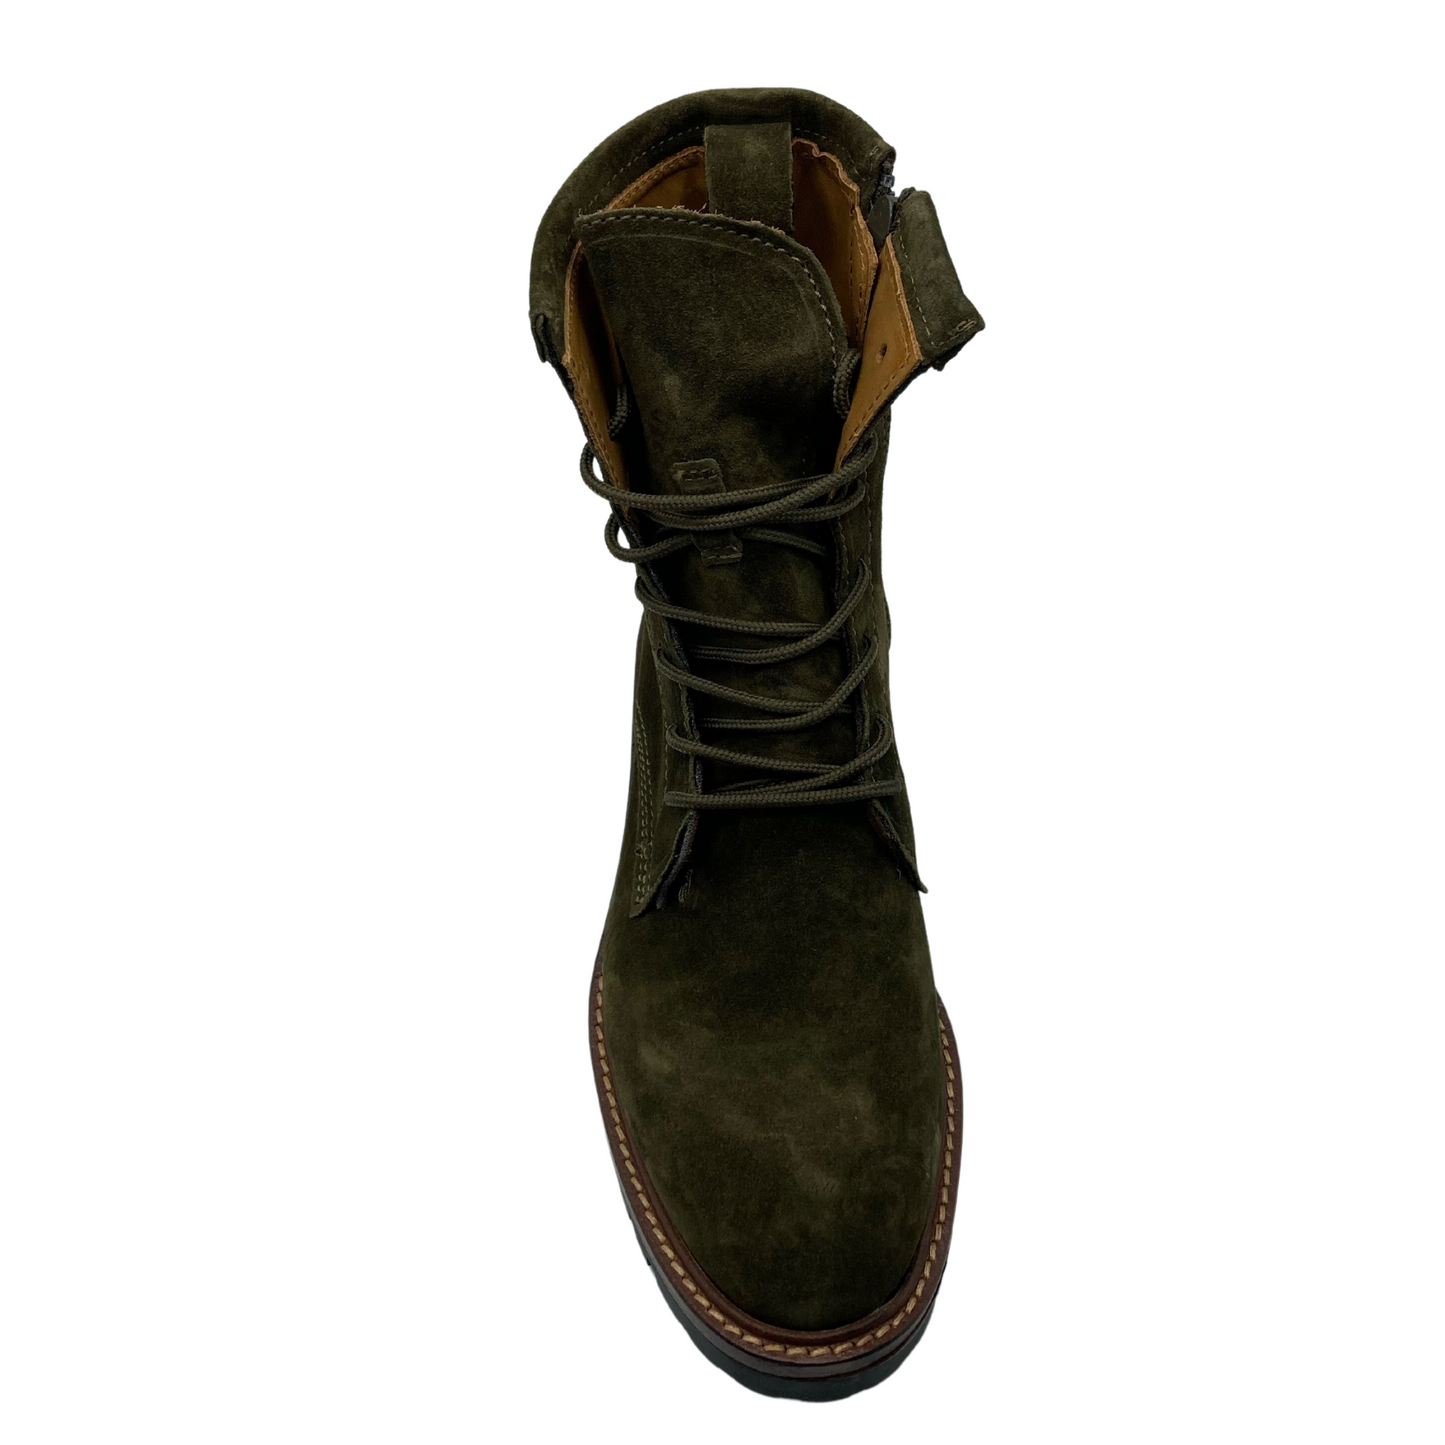 Front view of khaki green boot with matching laces and rounded toe